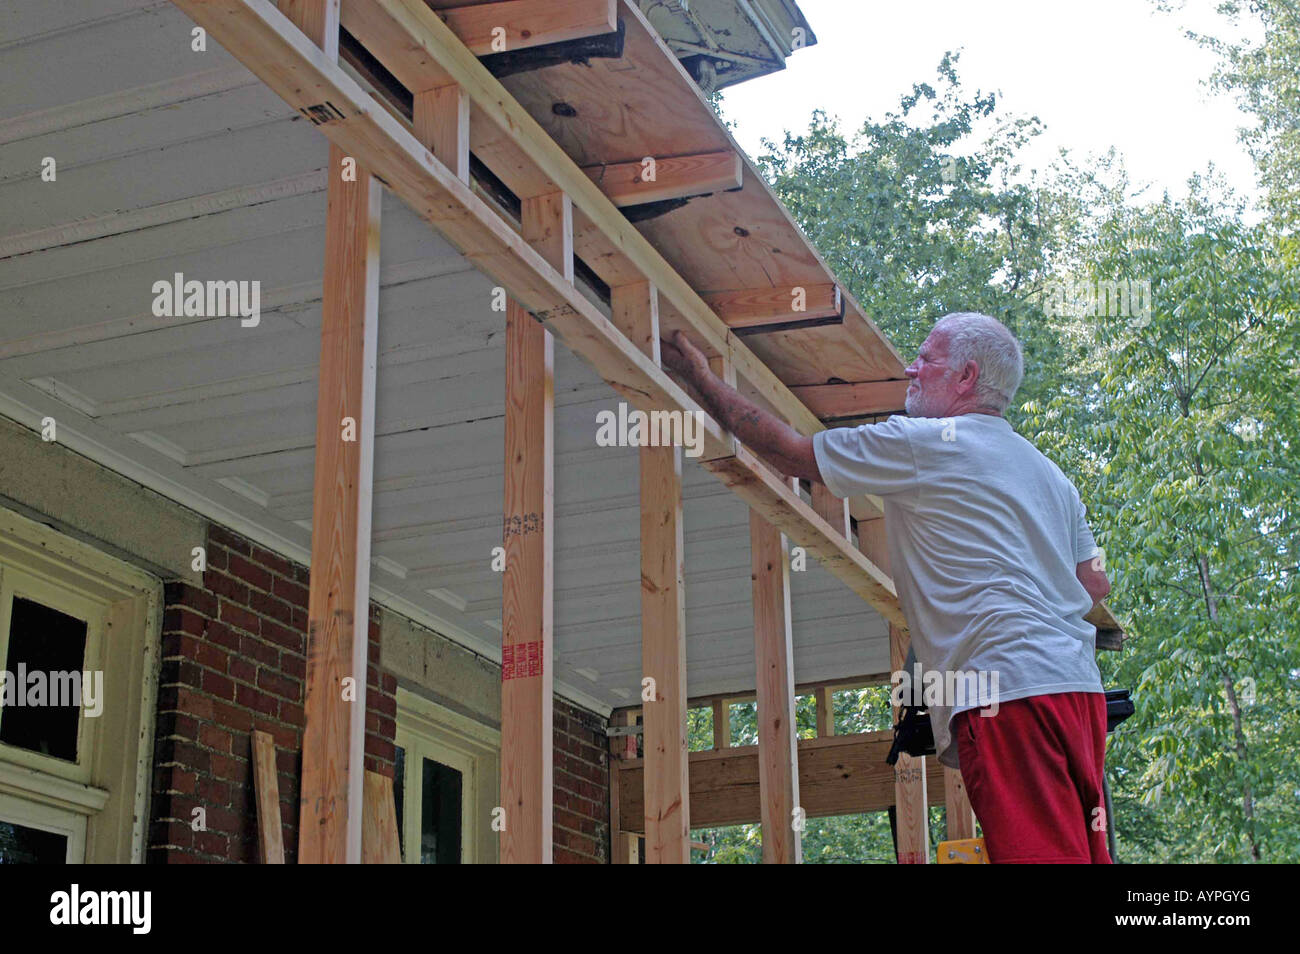 Carpenter builds porch on Victorian home, historic preservation, careers Galena Ohio USA midwest Stock Photo